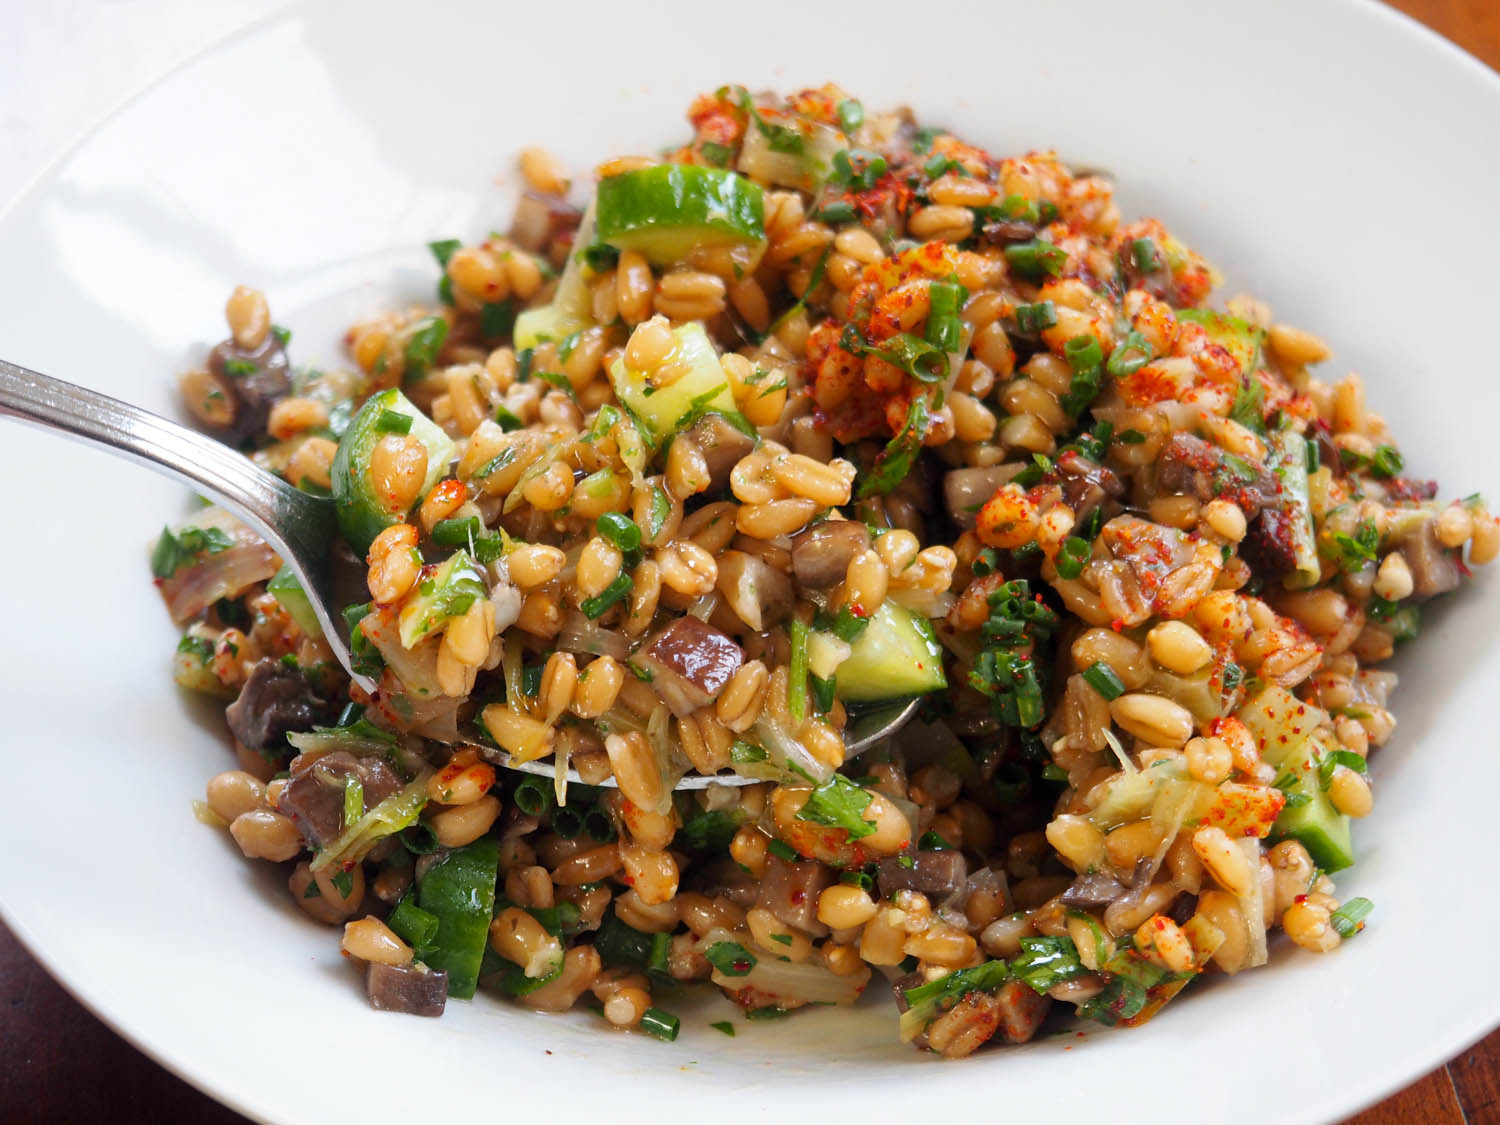 Grain Side Dishes
 23 Nutty Tasty and Filling Recipes With Whole Grains